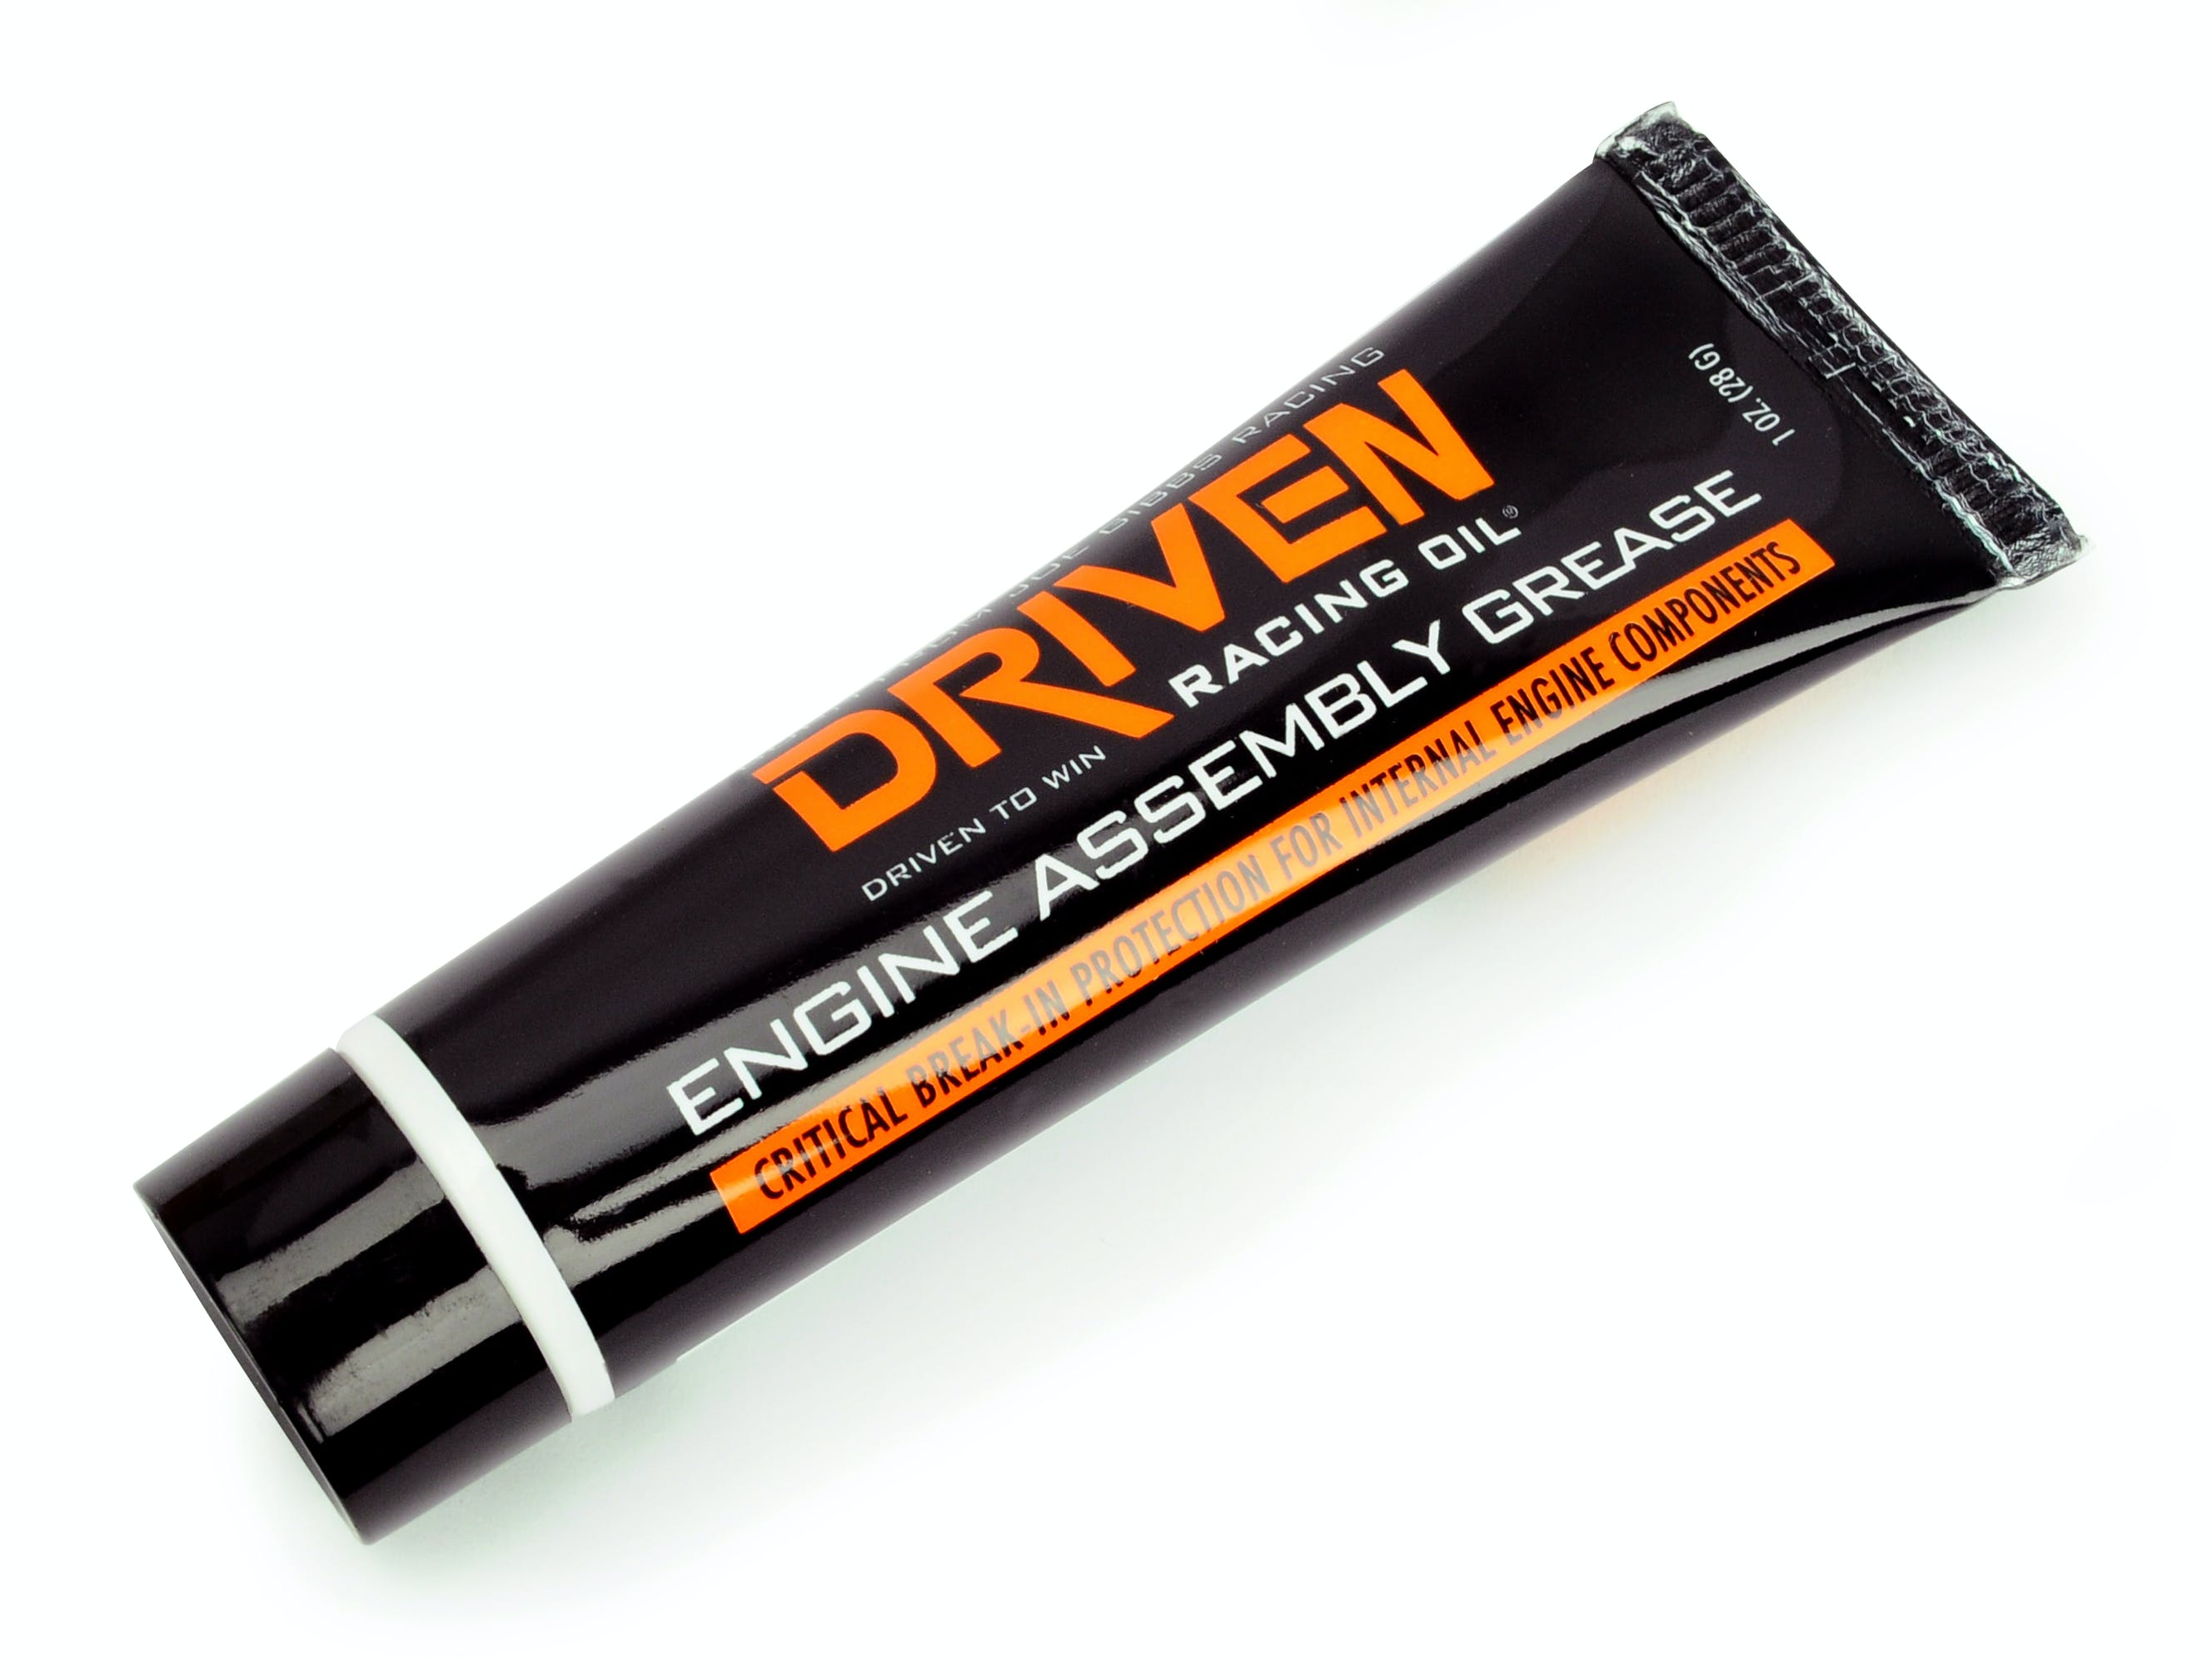 Driven Racing Oil 00732 Extreme Pressure Engine Assembly Grease (1 oz. tube)